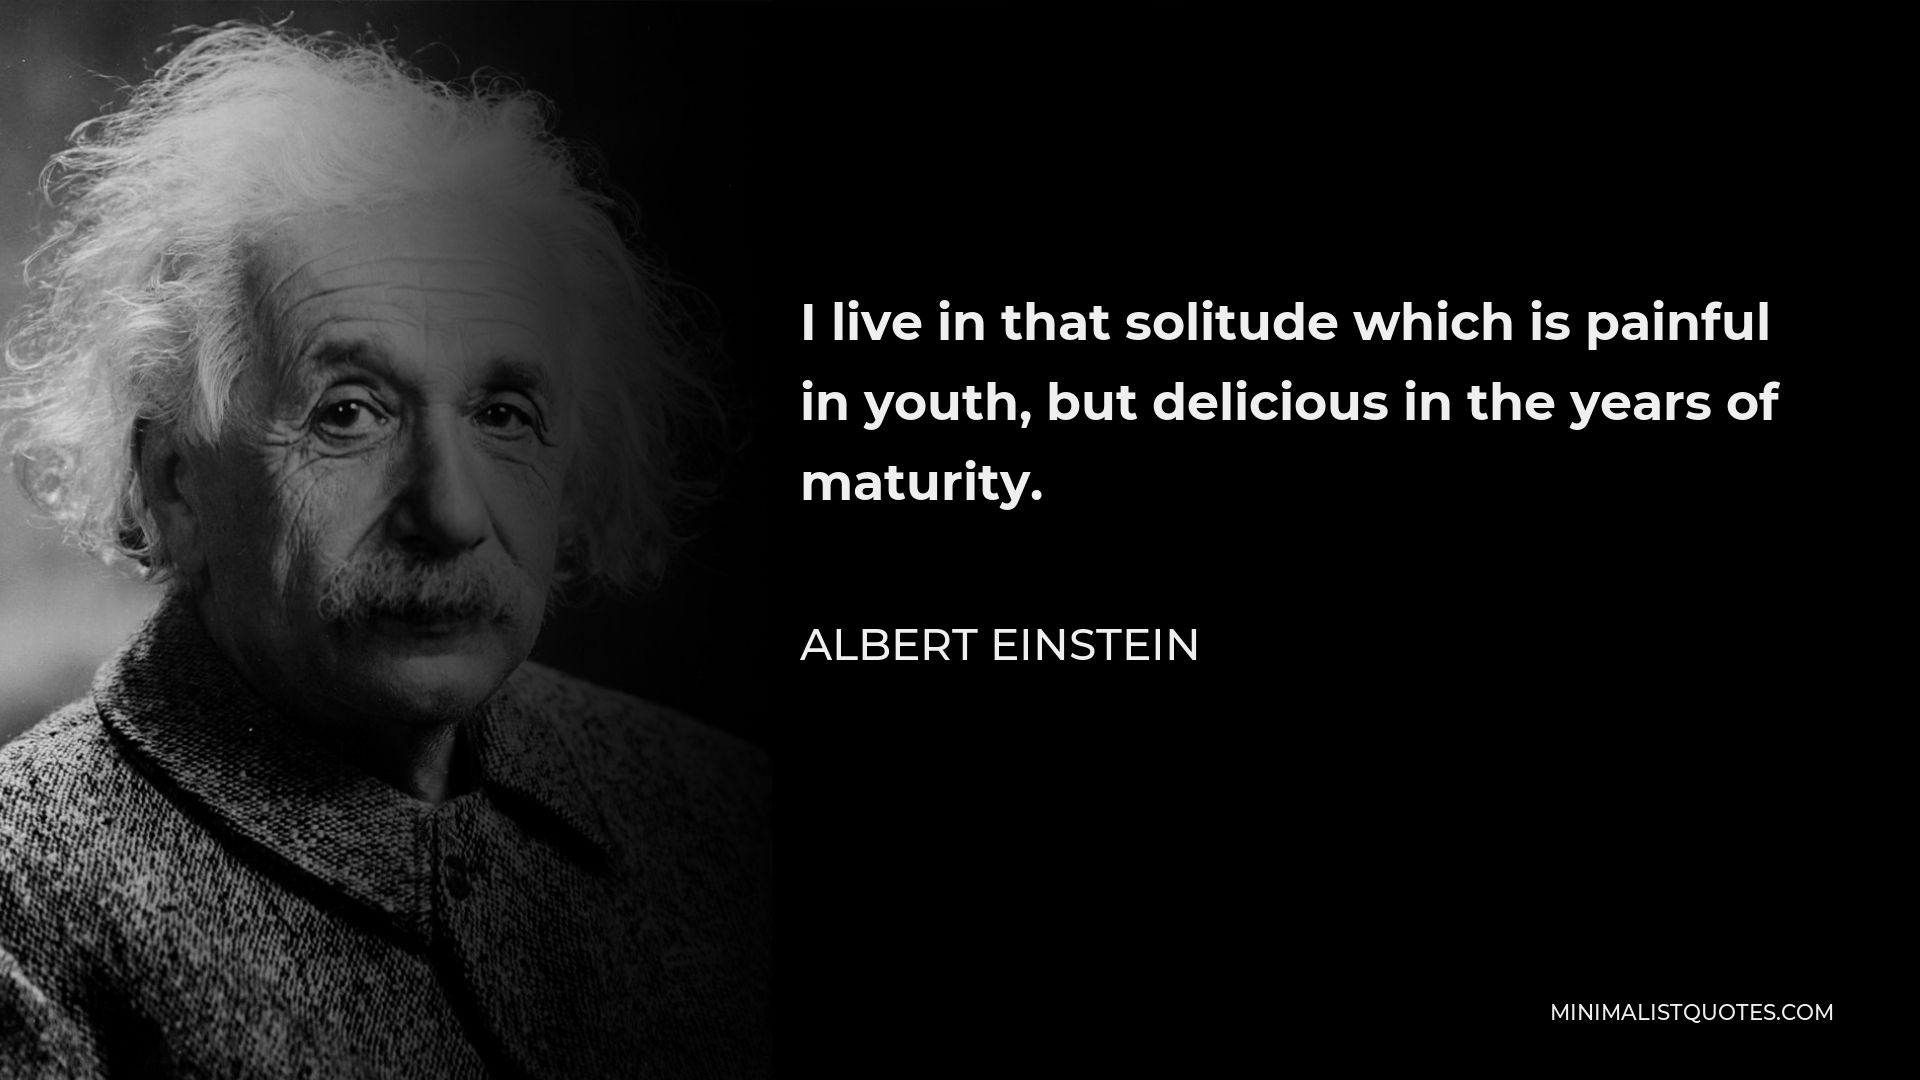 Albert Einstein Quote - I live in that solitude which is painful in youth, but delicious in the years of maturity.